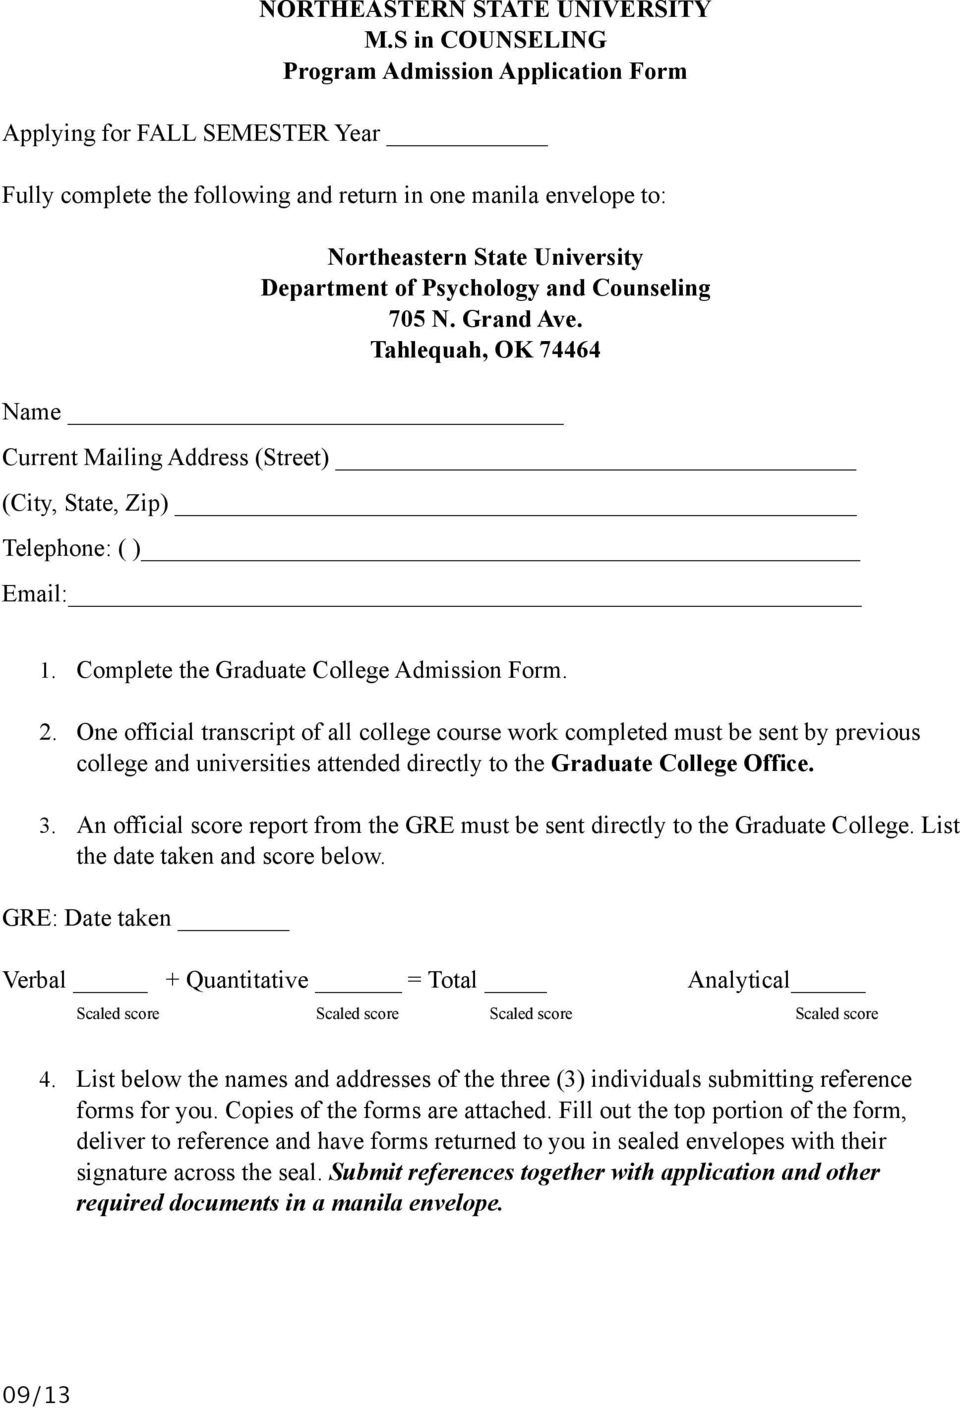 Psychology and Counseling 705 N. Grand Ave. Tahlequah, OK 74464 Name Current Mailing Address (Street) (City, State, Zip) Telephone: ( ) Email: 1. Complete the Graduate College Admission Form. 2.